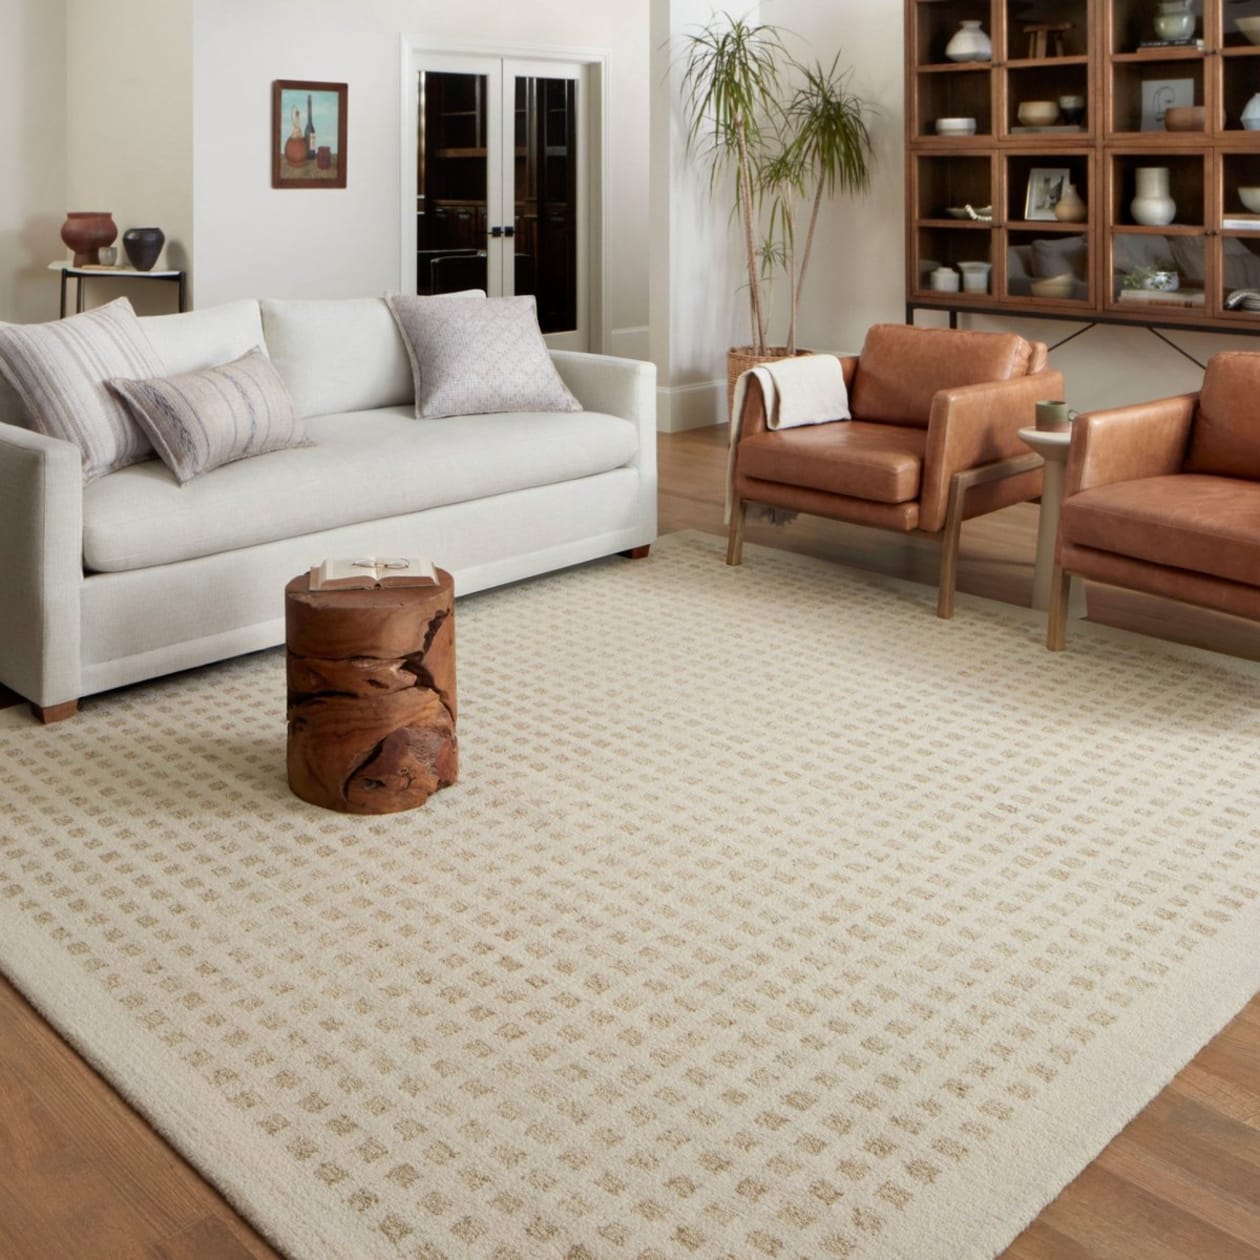 9x12 Area Rugs to Fit Your Home | Rugs Direct